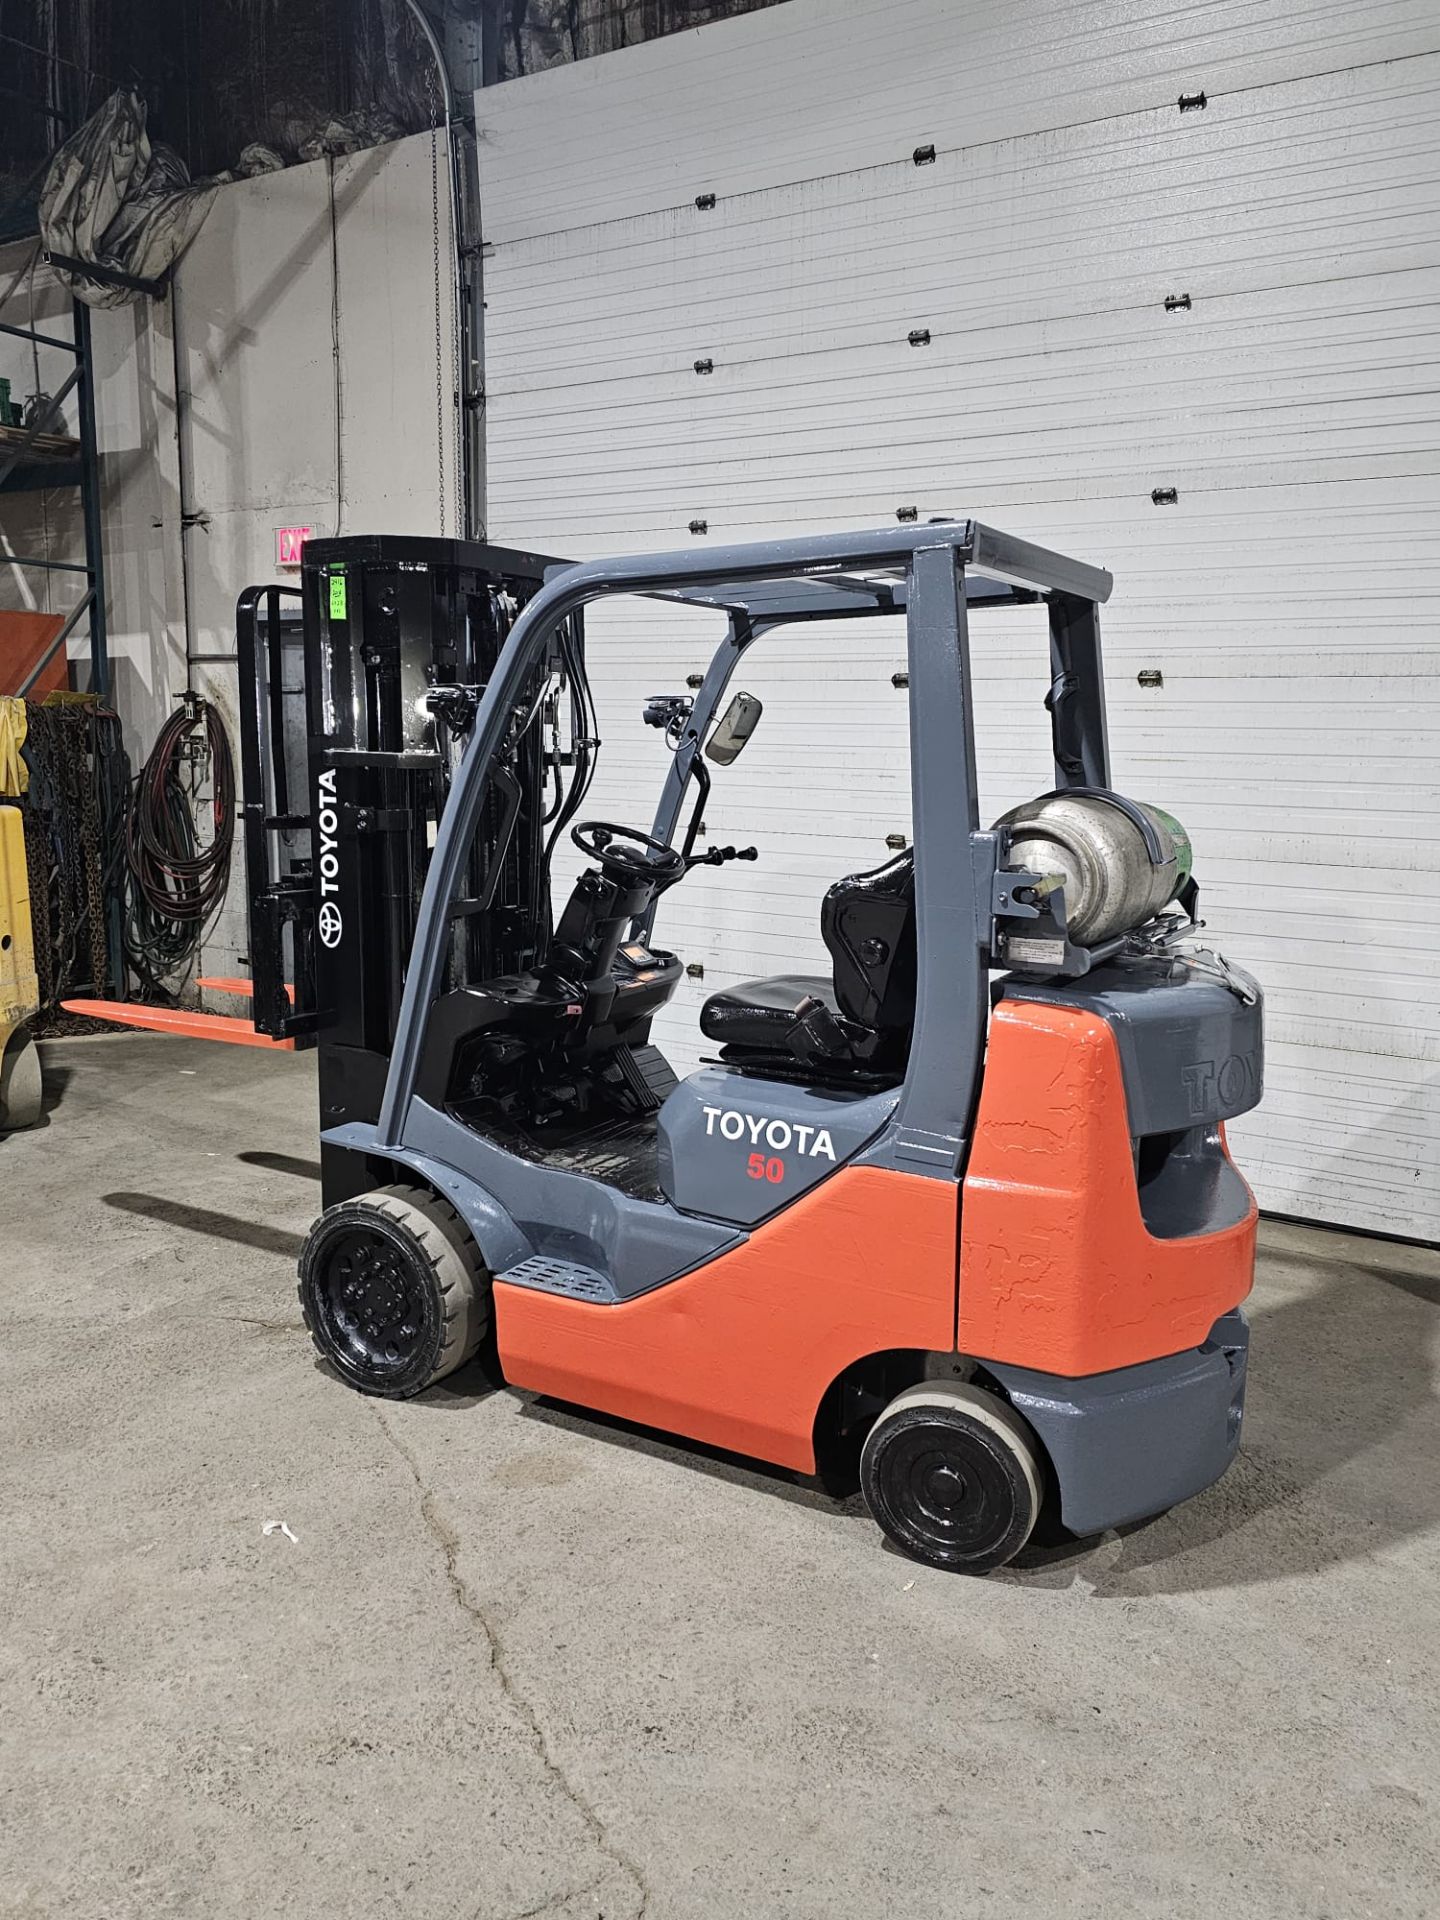 2018 TOYOTA 5,000lbs Capacity LPG (Propane) Forklift 4-STAGE with sideshift (no propane tank - Image 3 of 5